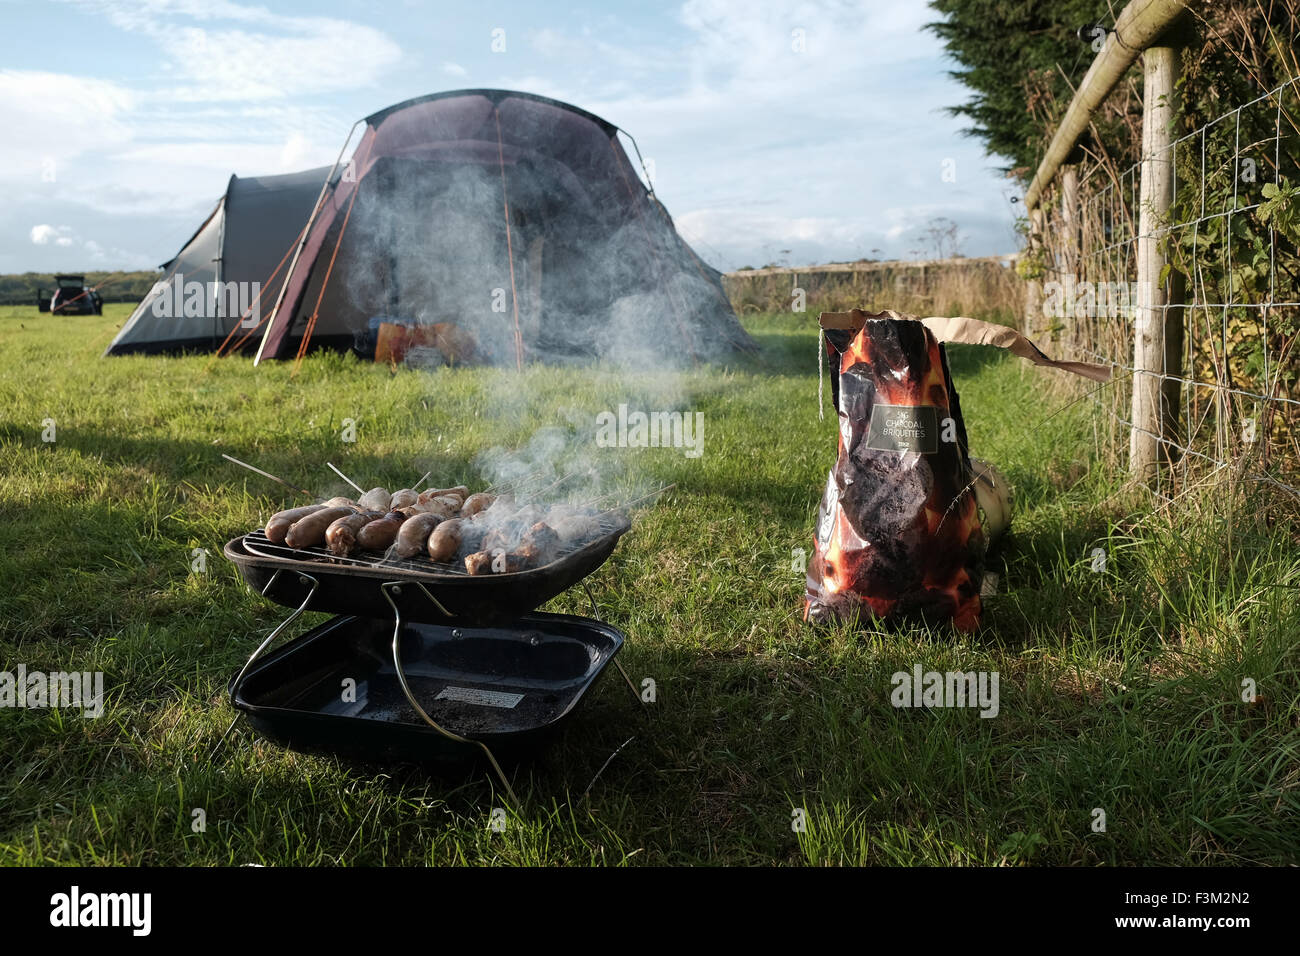 Barbecue next to a tent Stock Photo